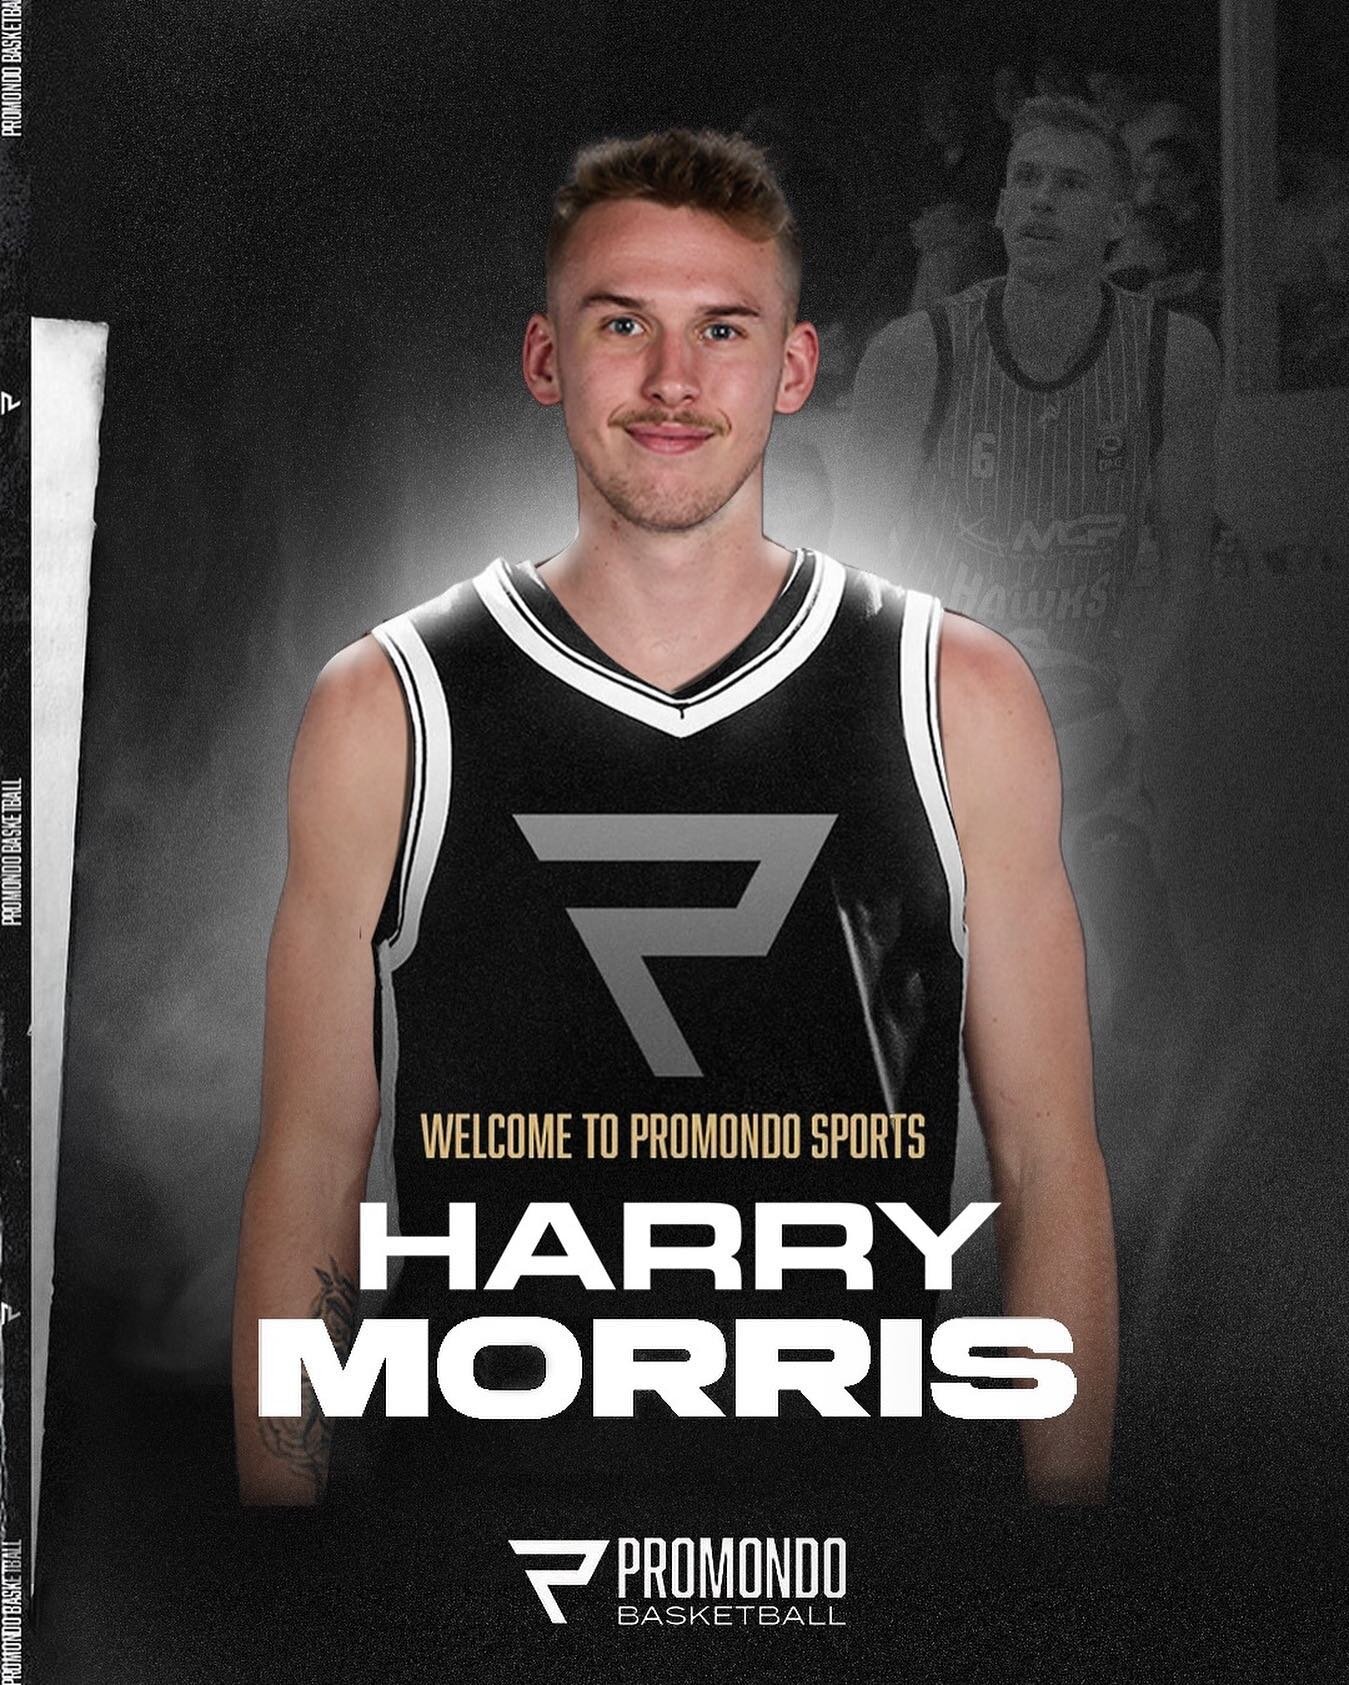 Welcome @h.morris__ 
Excited to have you join the team! A big future coming up and we are proud to be a part of it.